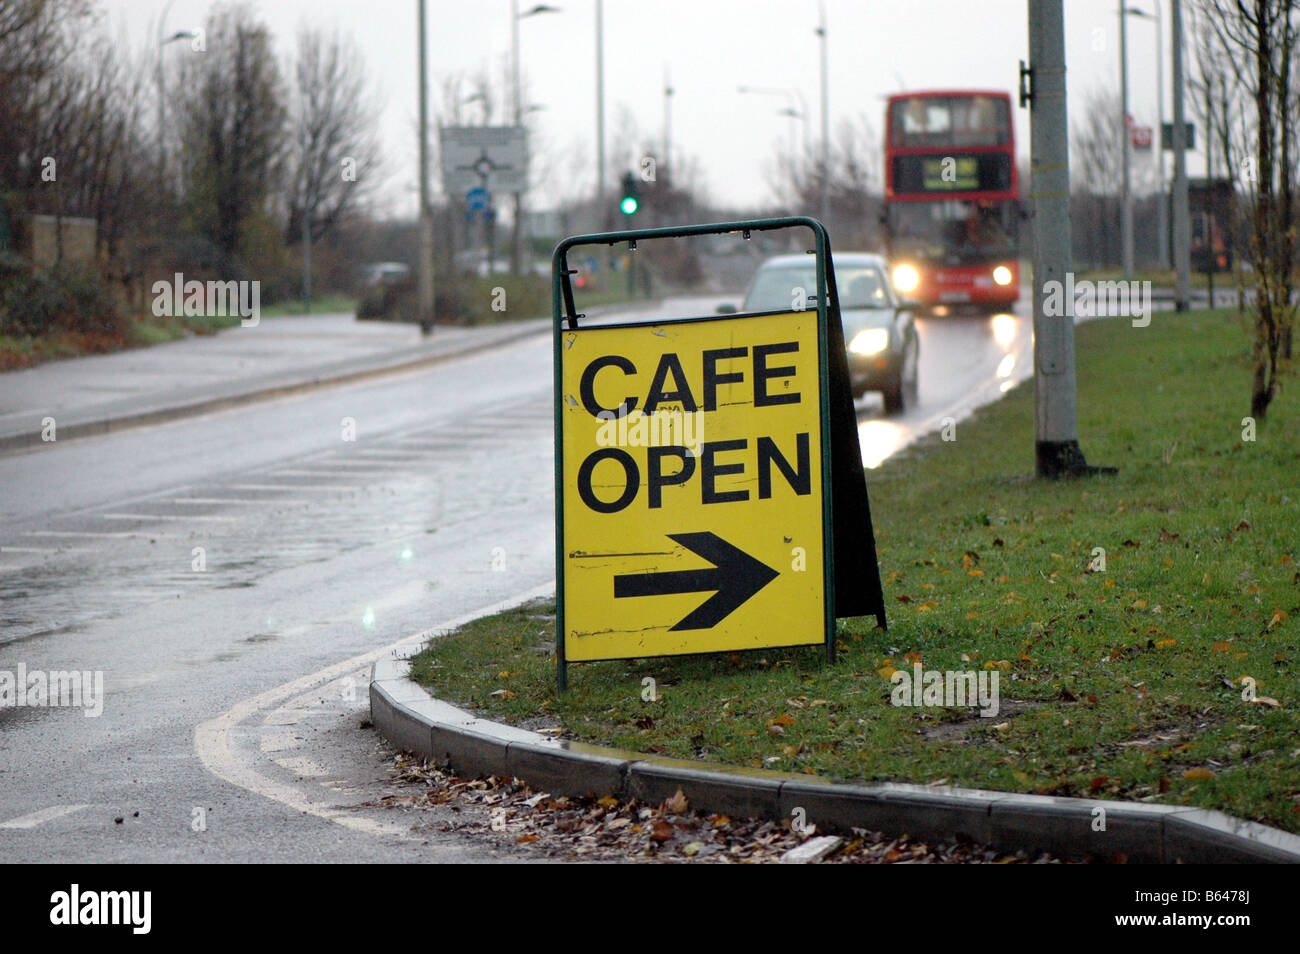 A cafe open sign Stock Photo